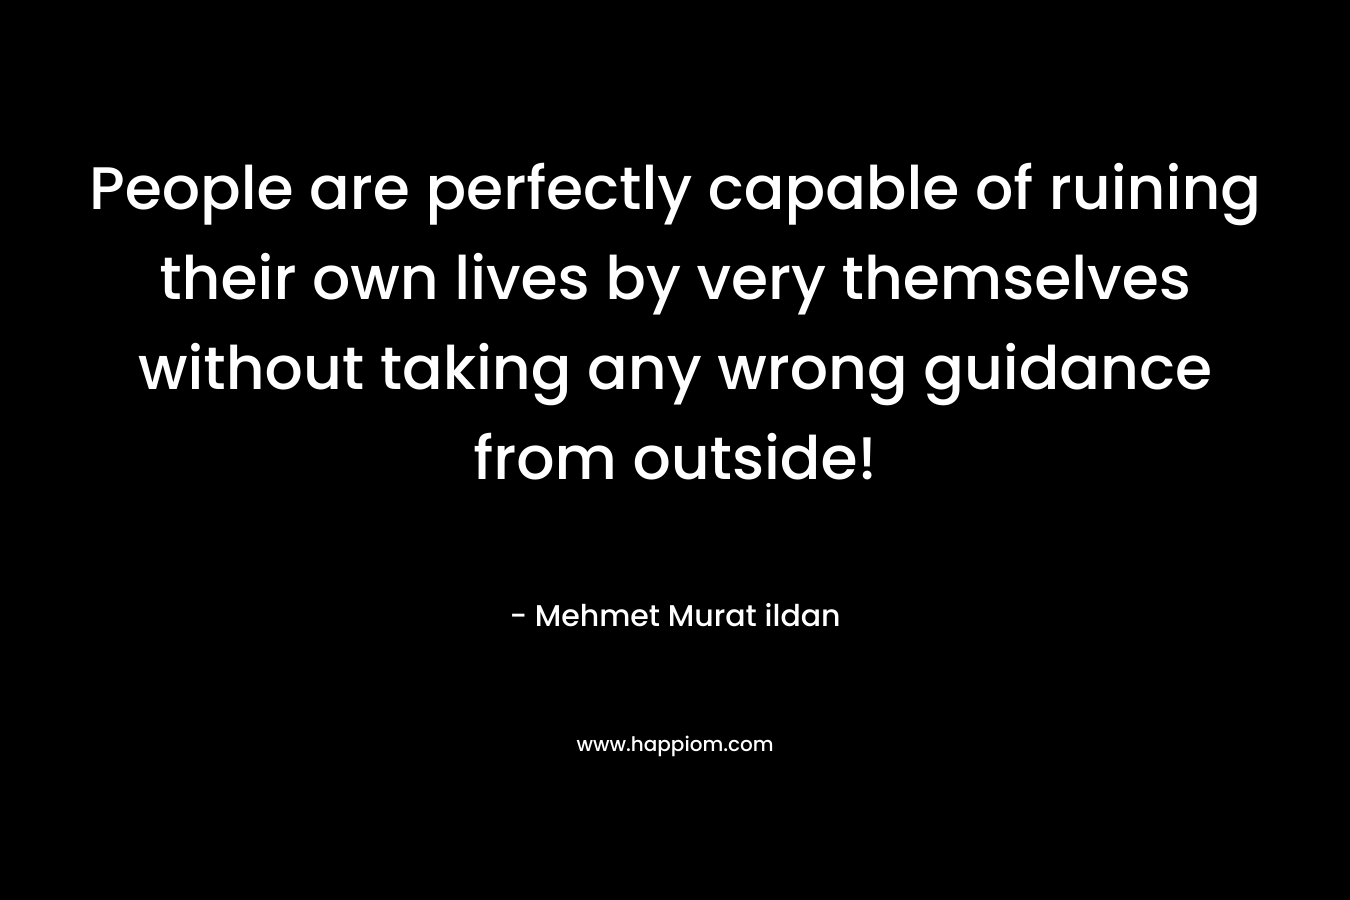 People are perfectly capable of ruining their own lives by very themselves without taking any wrong guidance from outside! – Mehmet Murat ildan